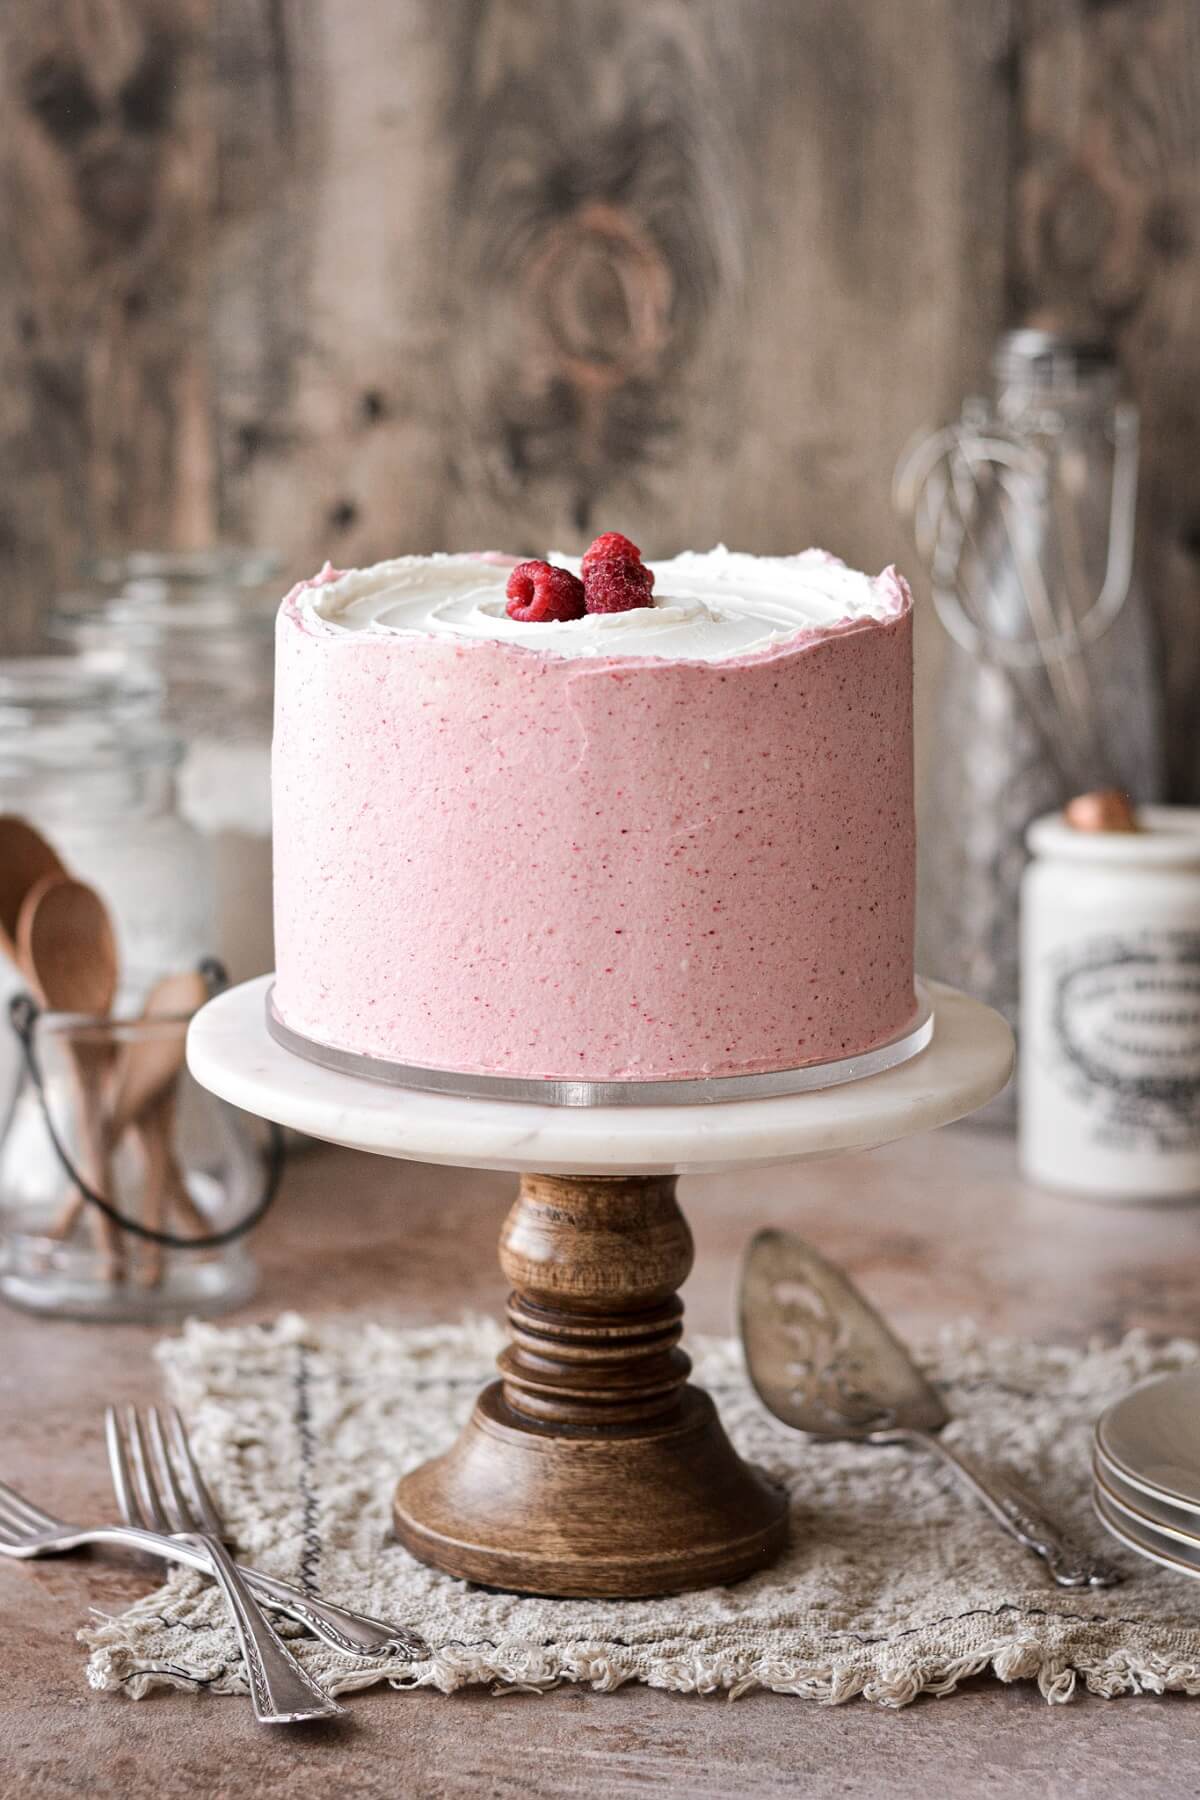 Raspberry vanilla cake with pink raspberry buttercream topped with raspberries.